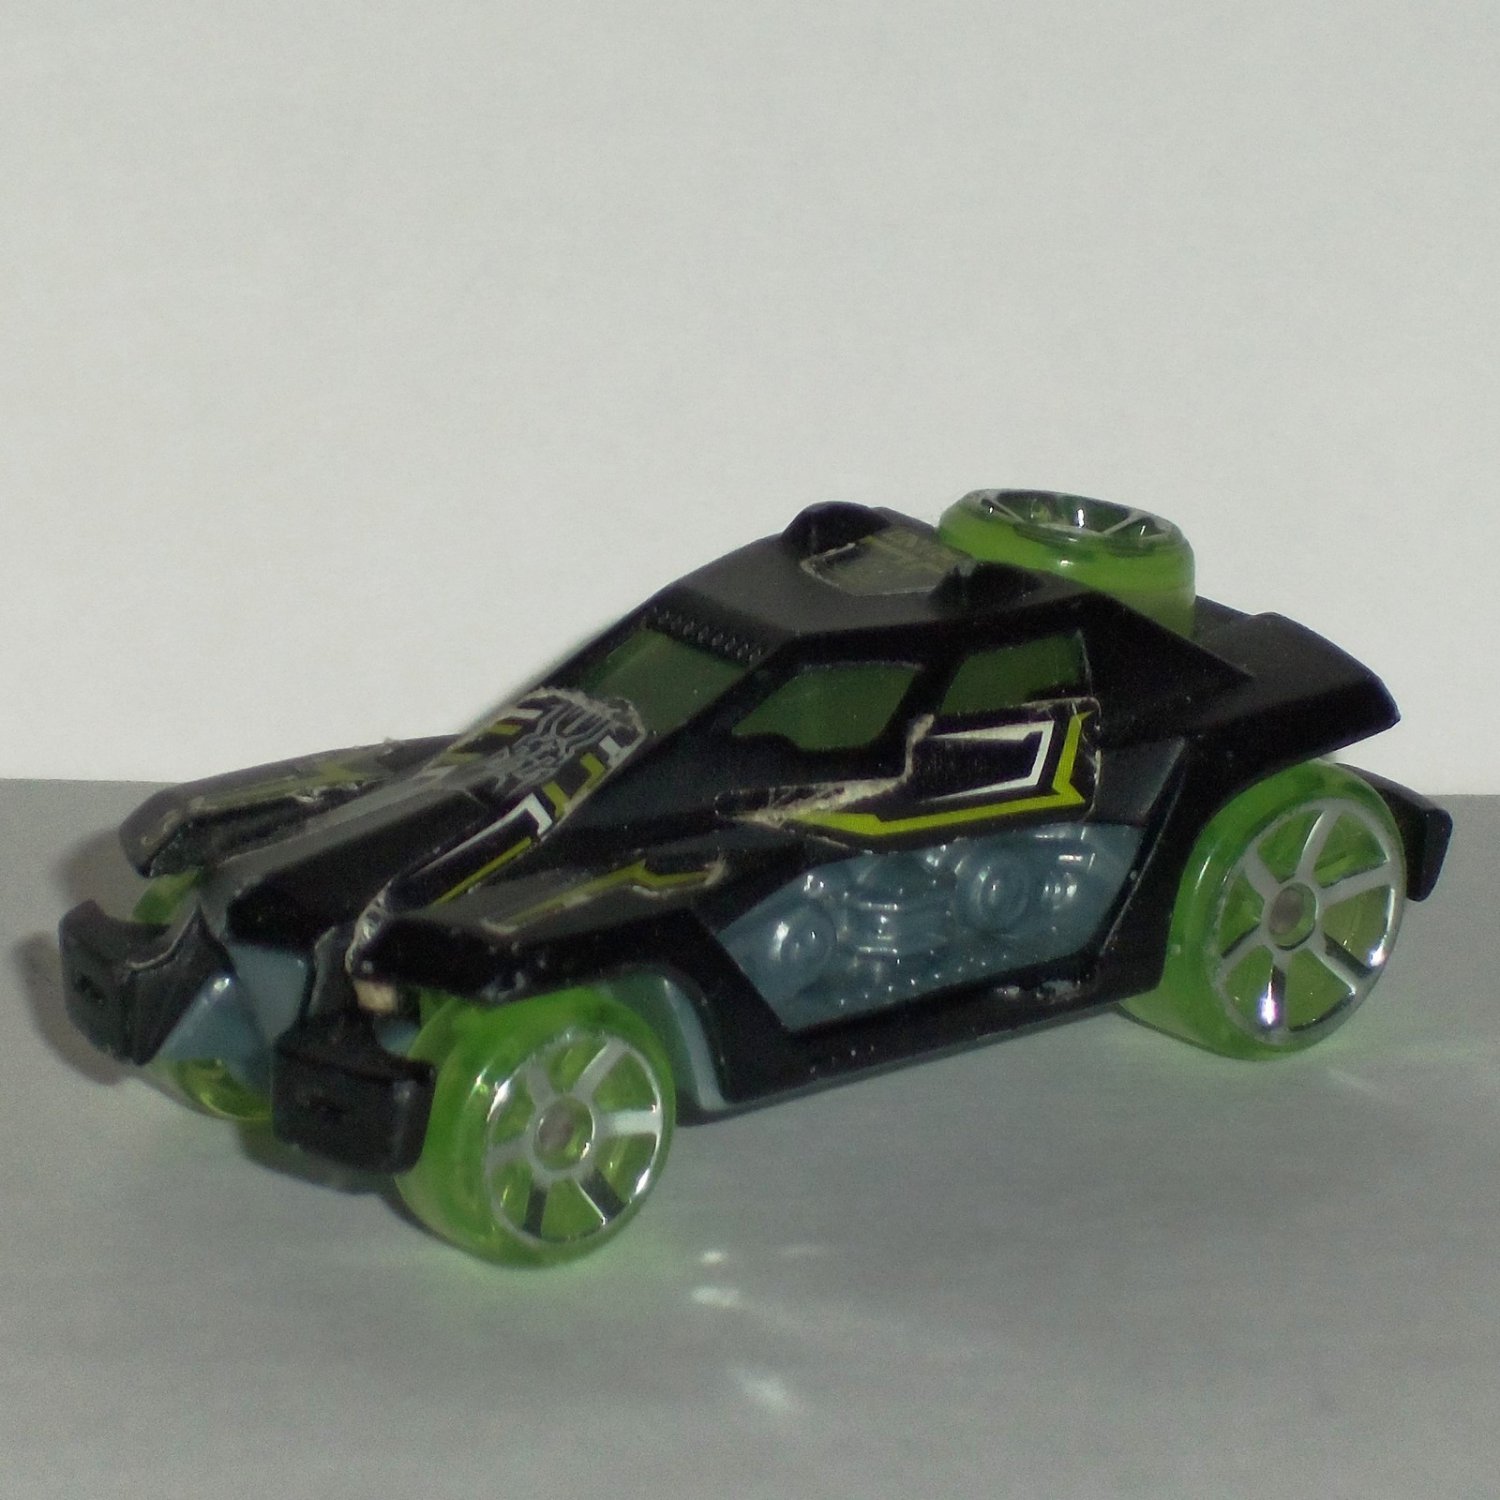 McDonald's 2005 Hot Wheels RD-04 Car Happy Meal Toy Loose Used.